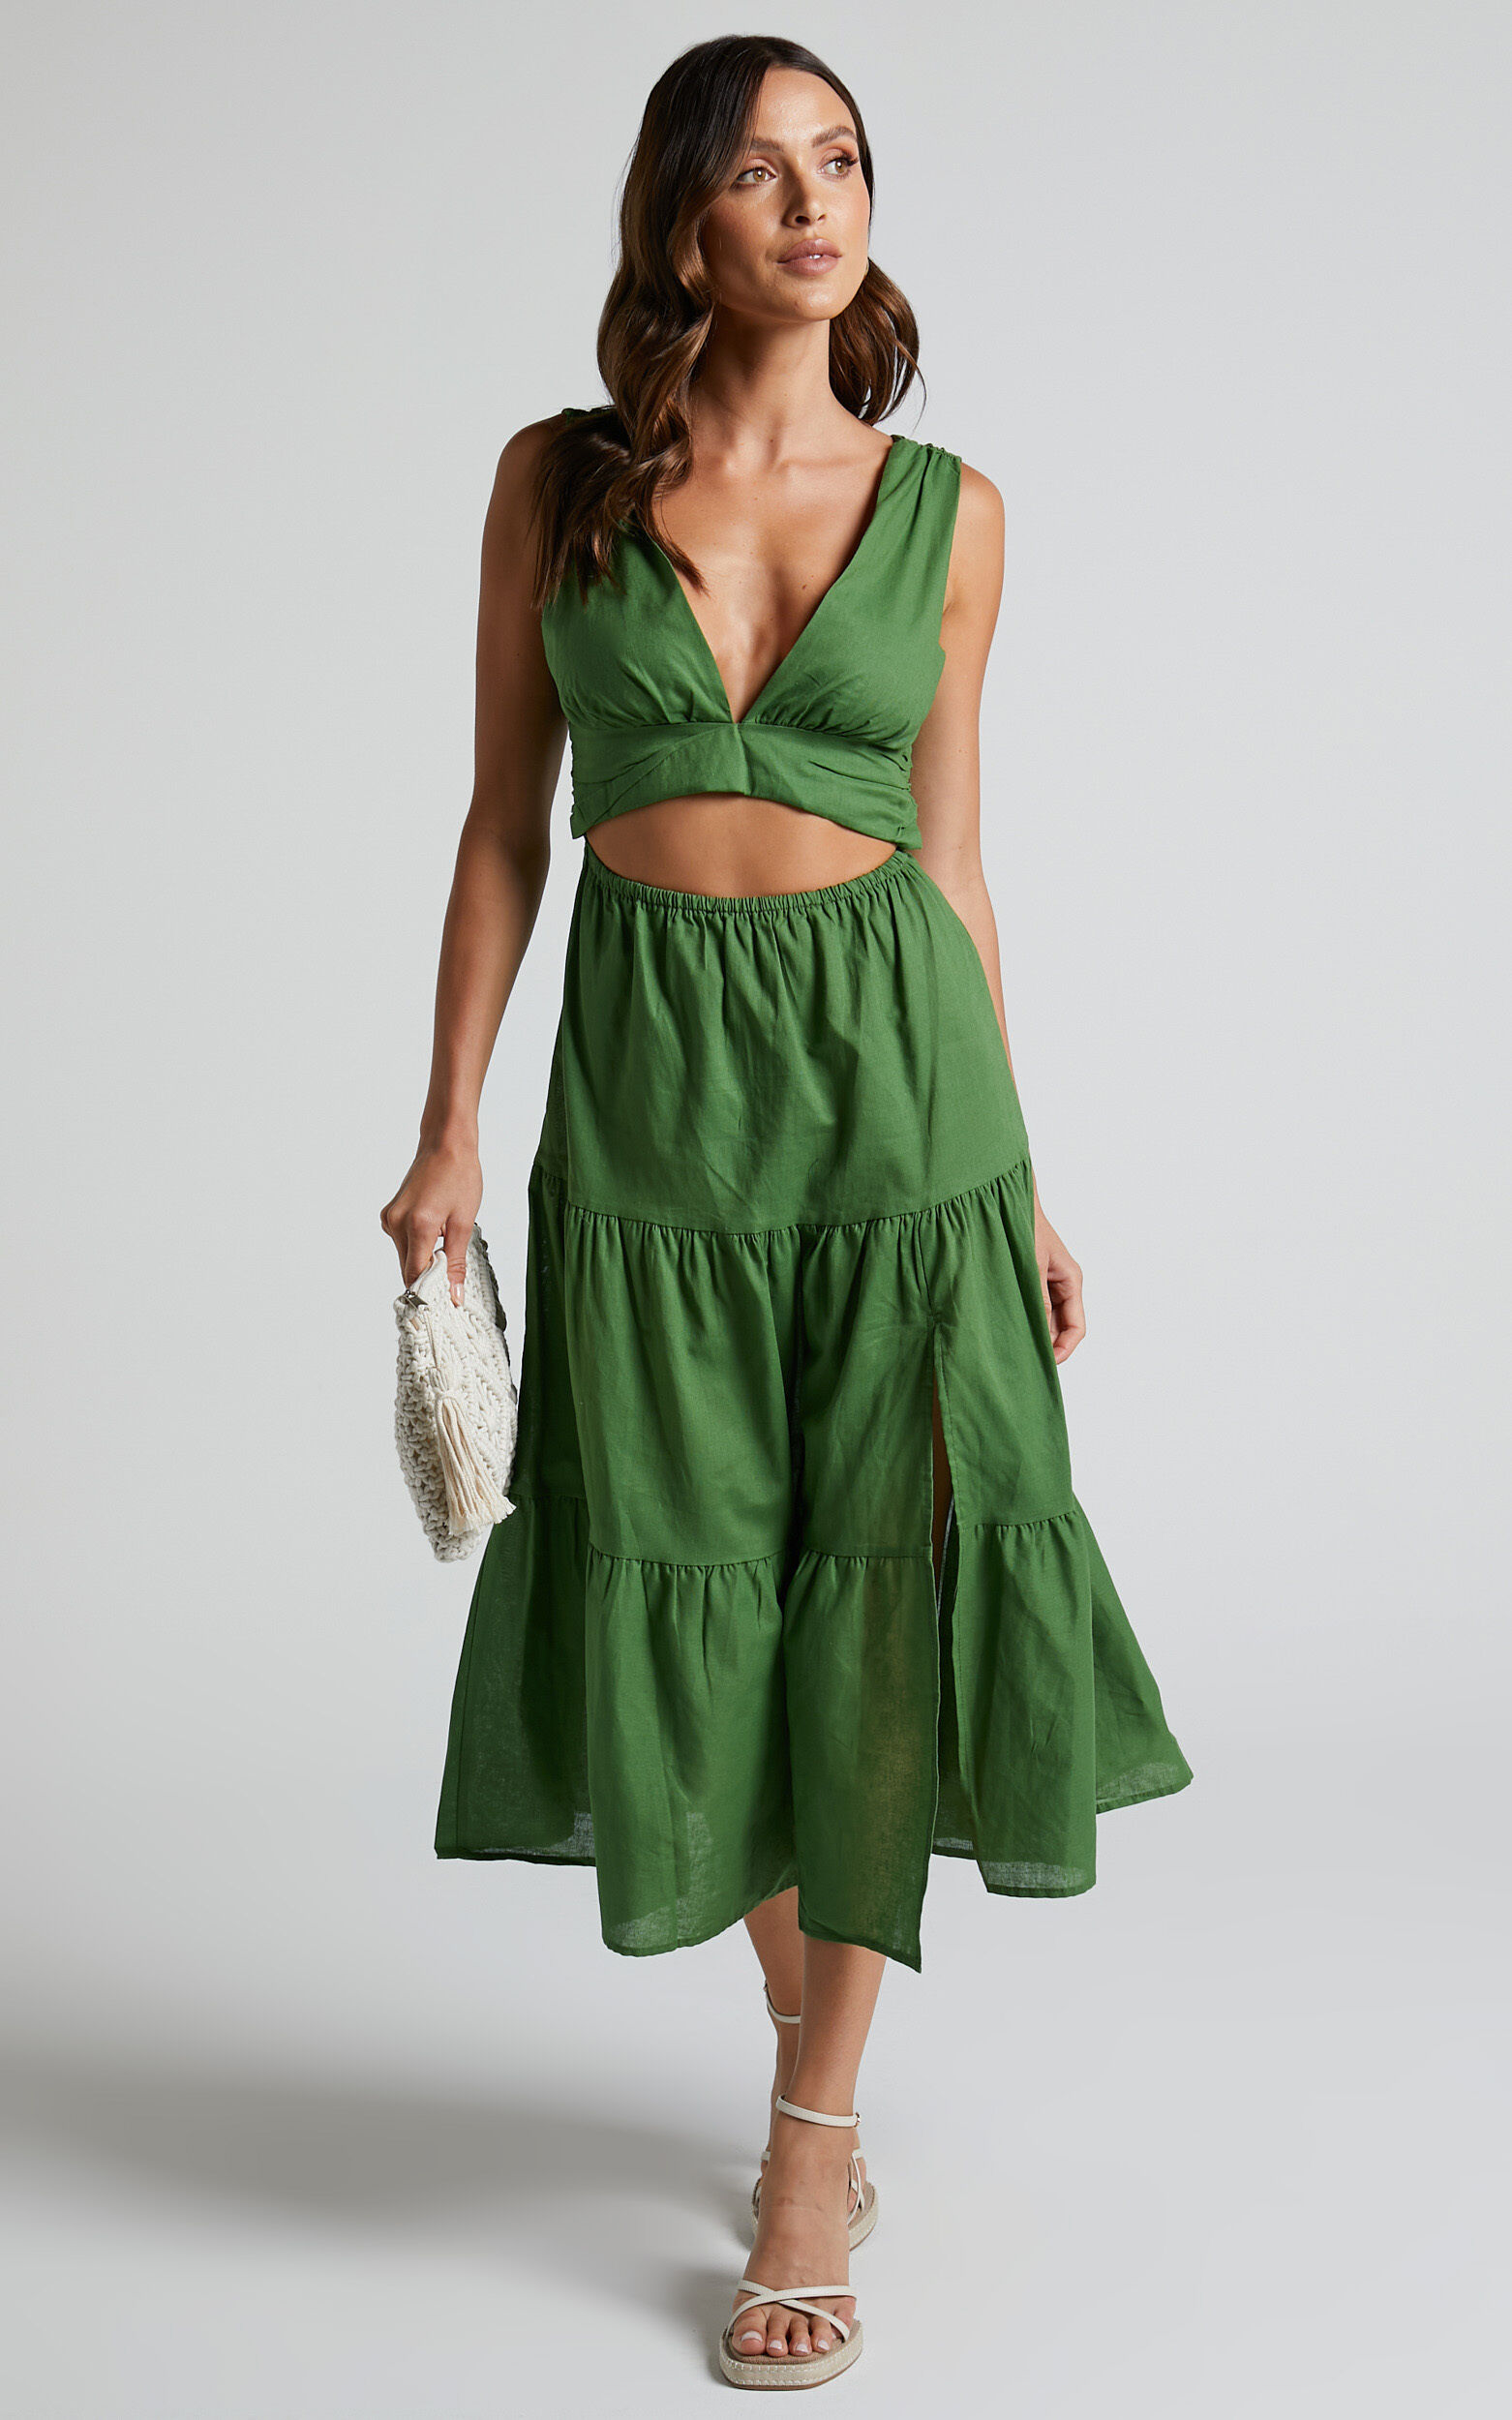 Spencer Midi Dress - V Neck Cut Out Tiered Dress in Green